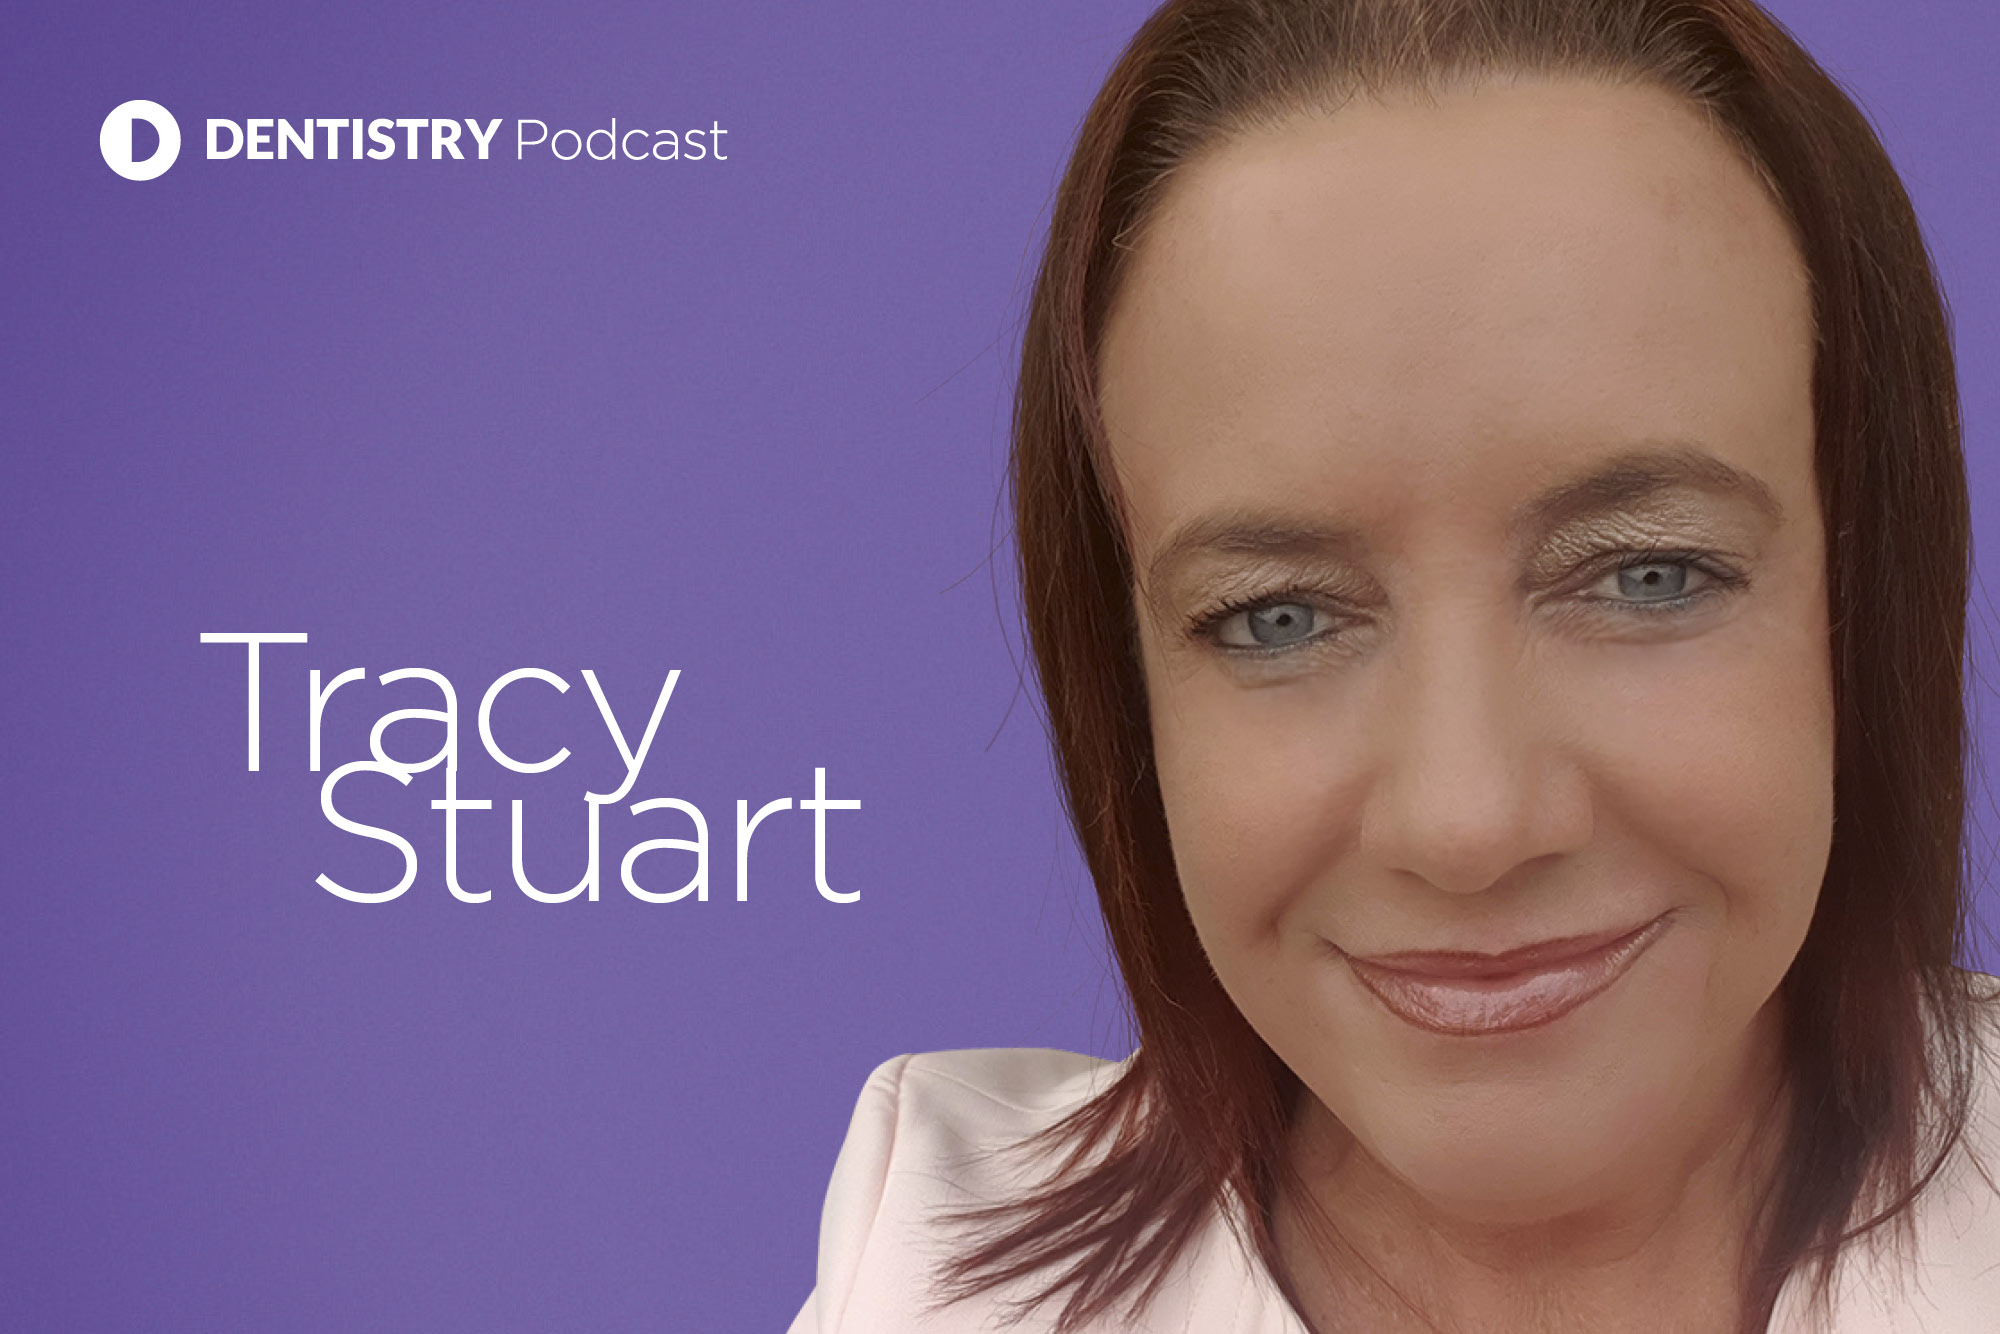 We speak to Tracy Stuart about why she chose to lose weight and get fit in the middle of a global pandemic